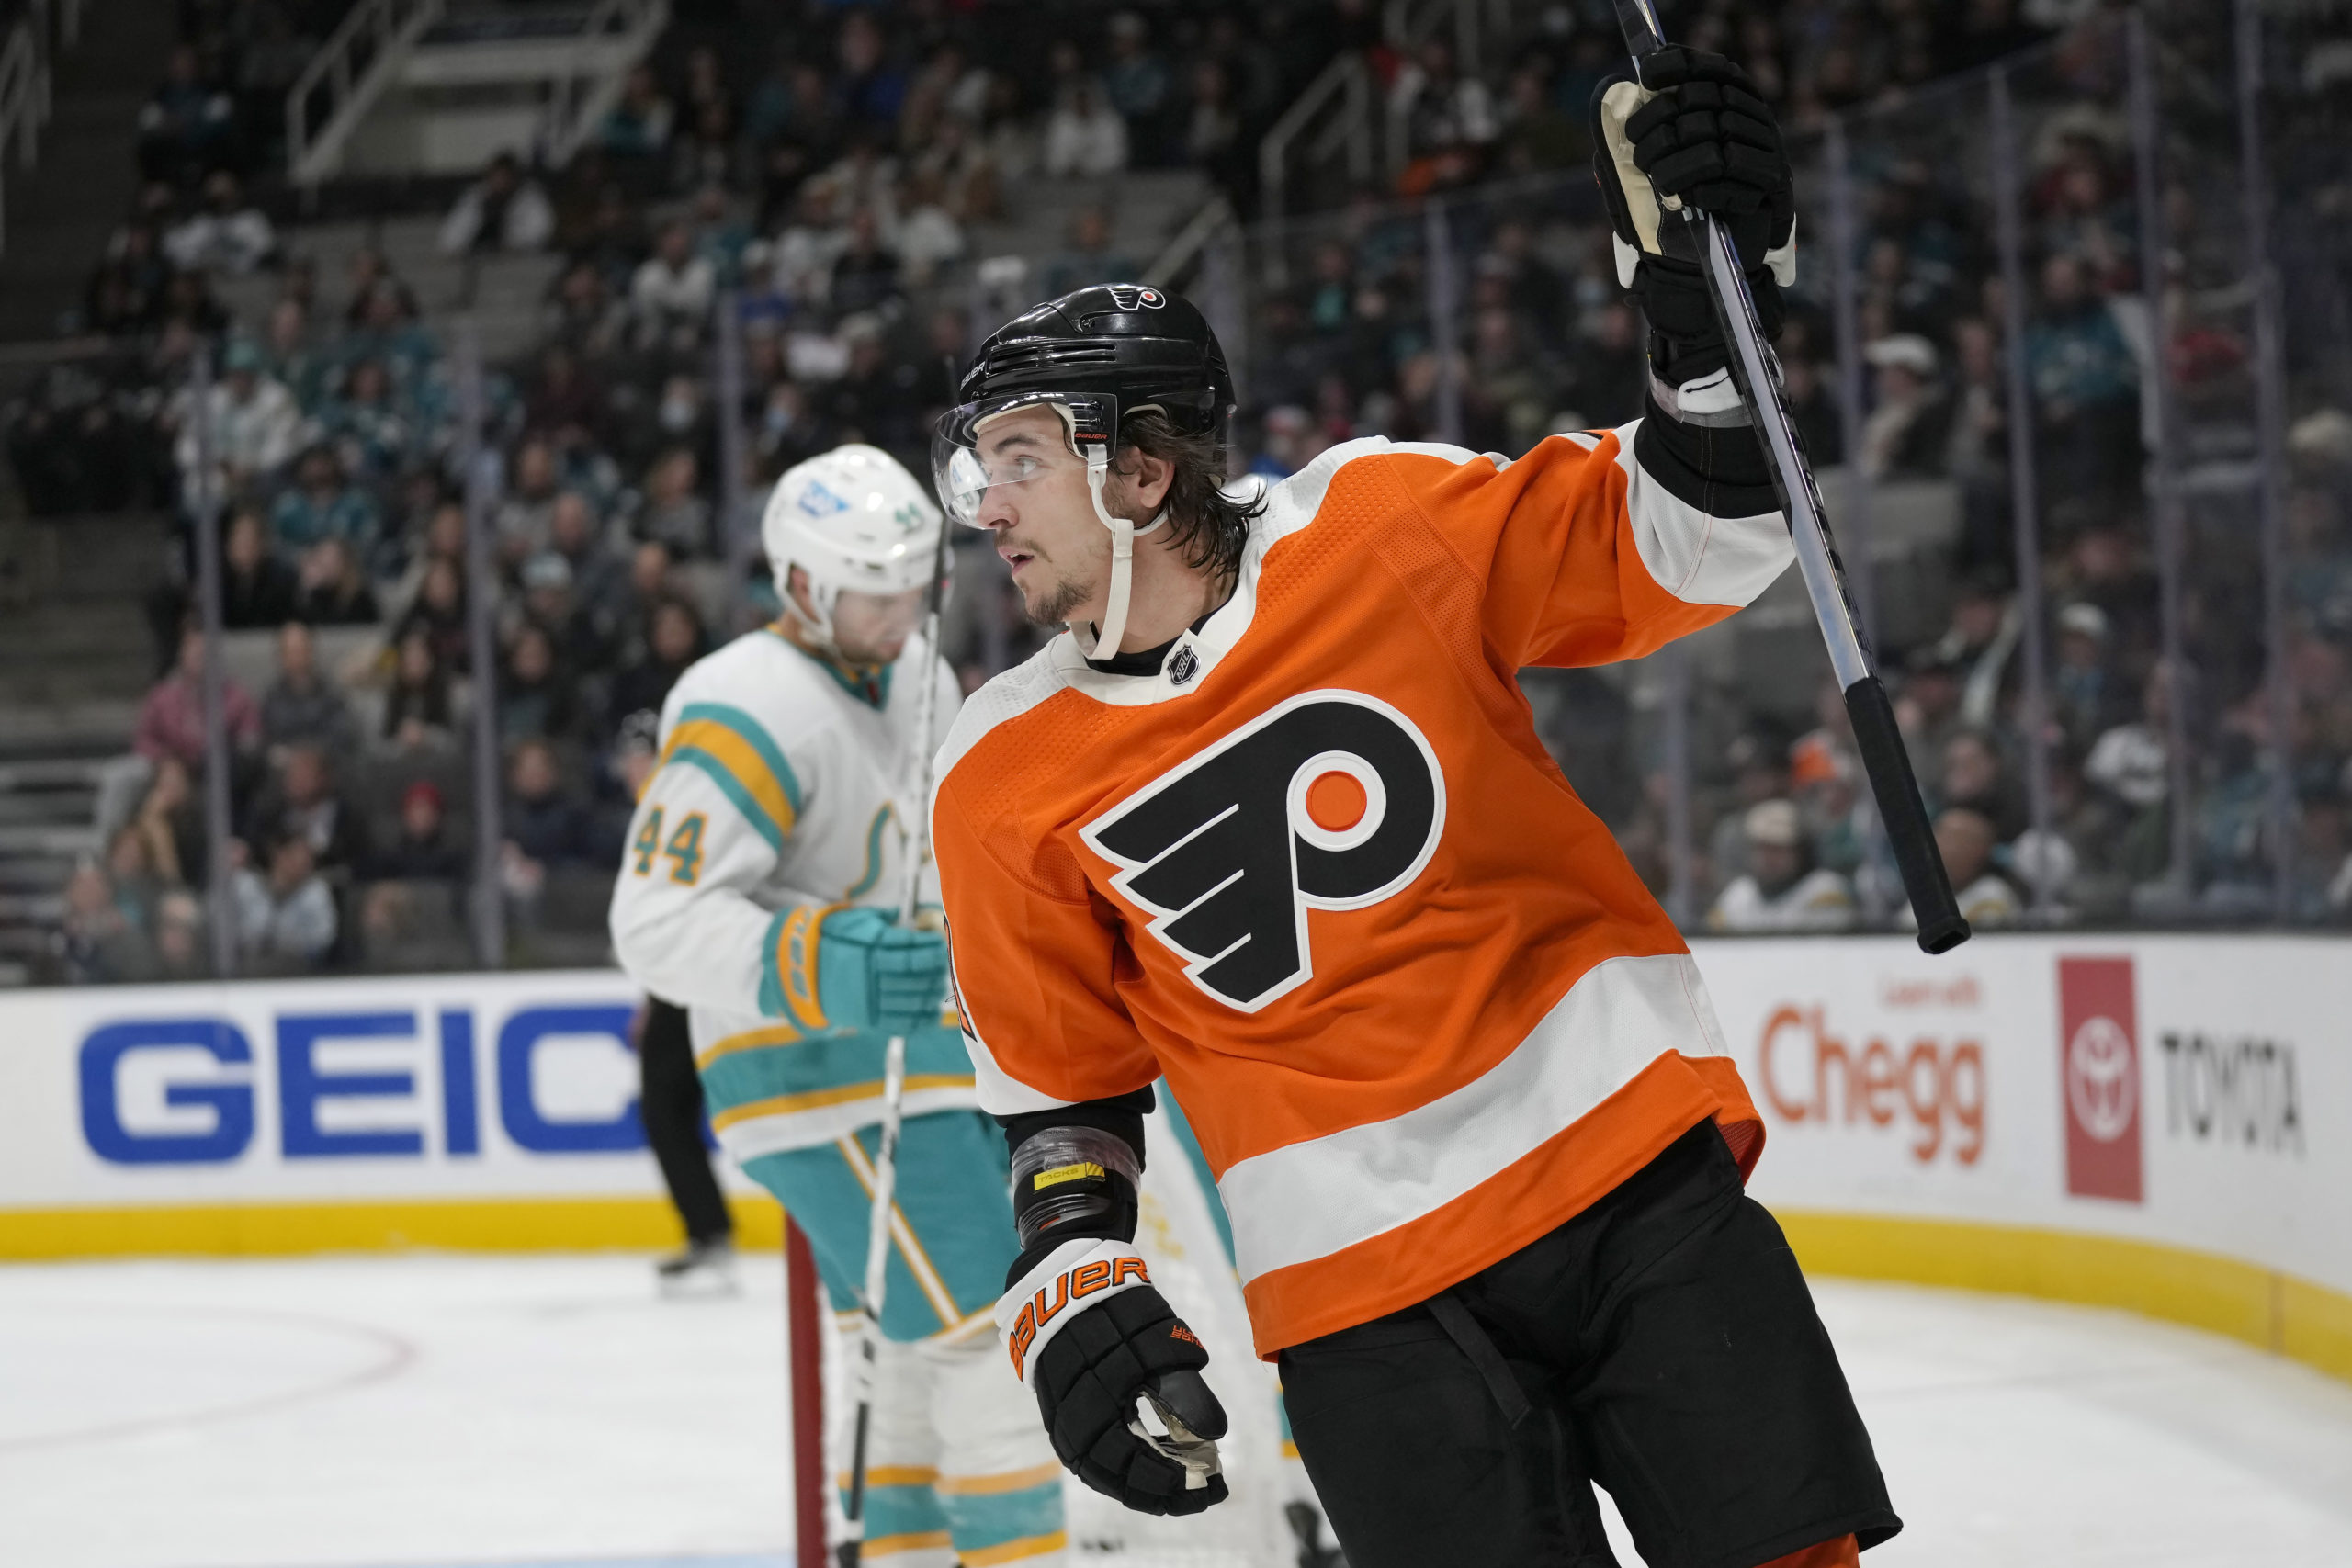 Flyers F Travis Konecny Named to 1st All-Star Game